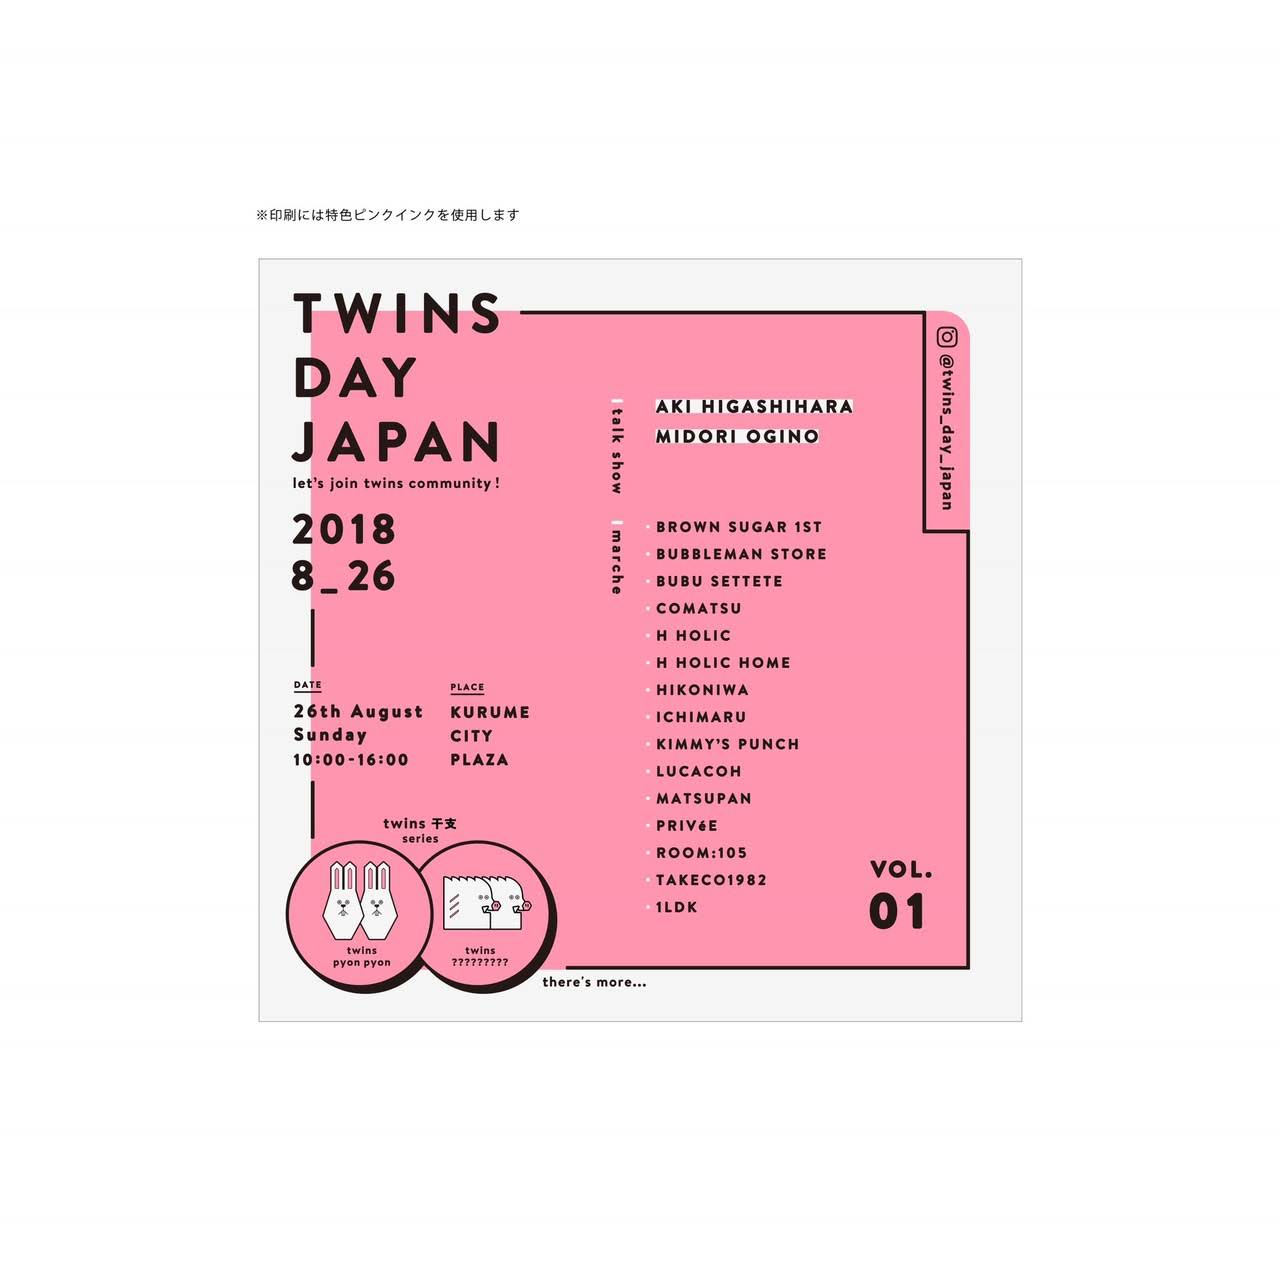 TWINS DAY JAPAN2018フライヤー